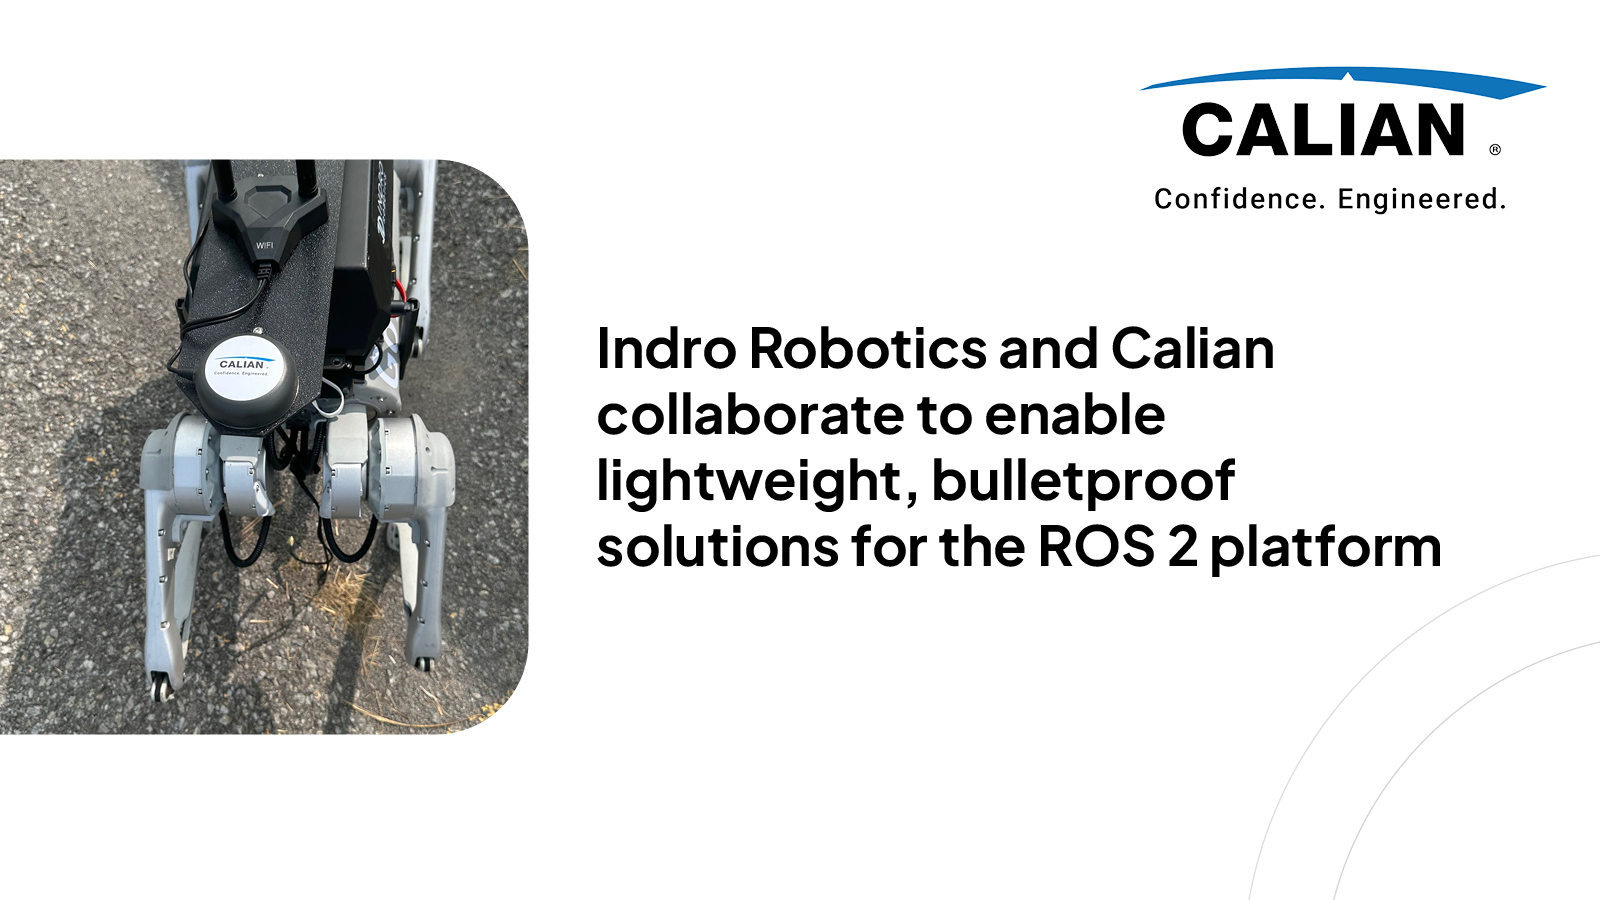 InDro Robotics and Calian collaborate to enable lightweight, bulletproof solutions for the ROS 2 platform